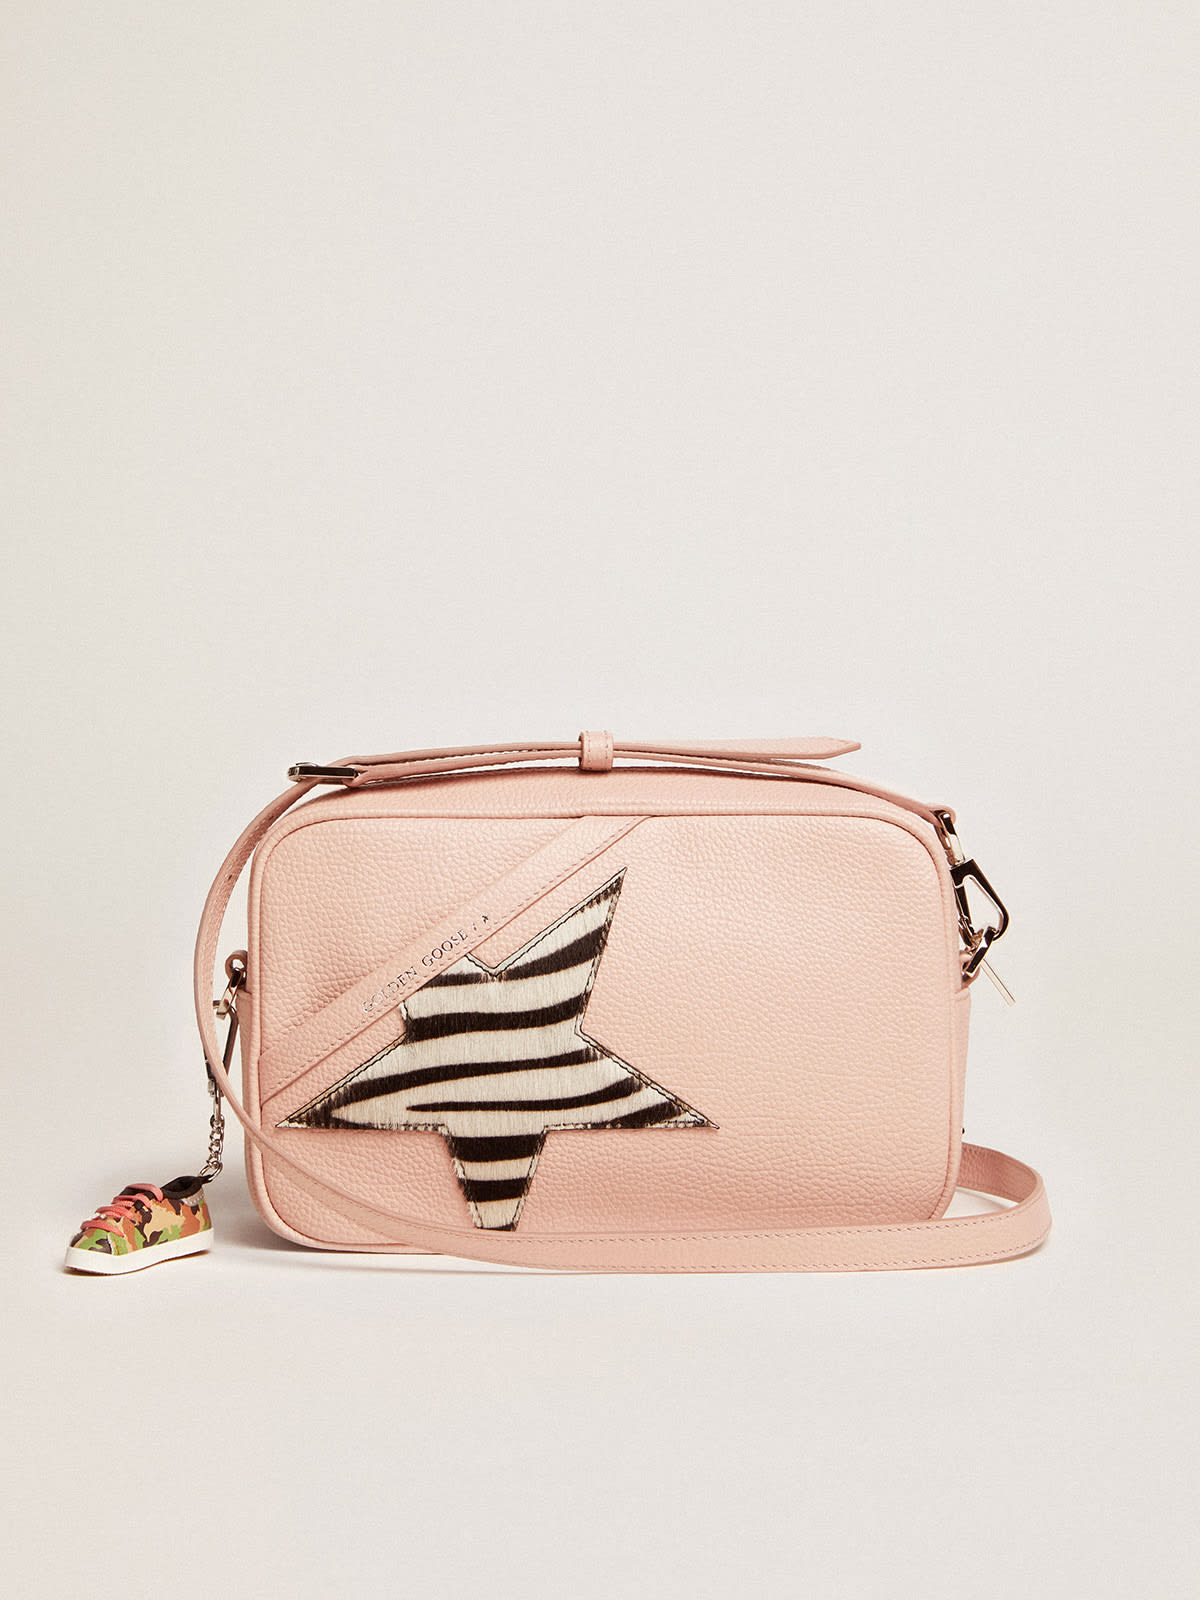 Golden Goose - Women's Star Bag in pink leather with zebra print pony skin star in 